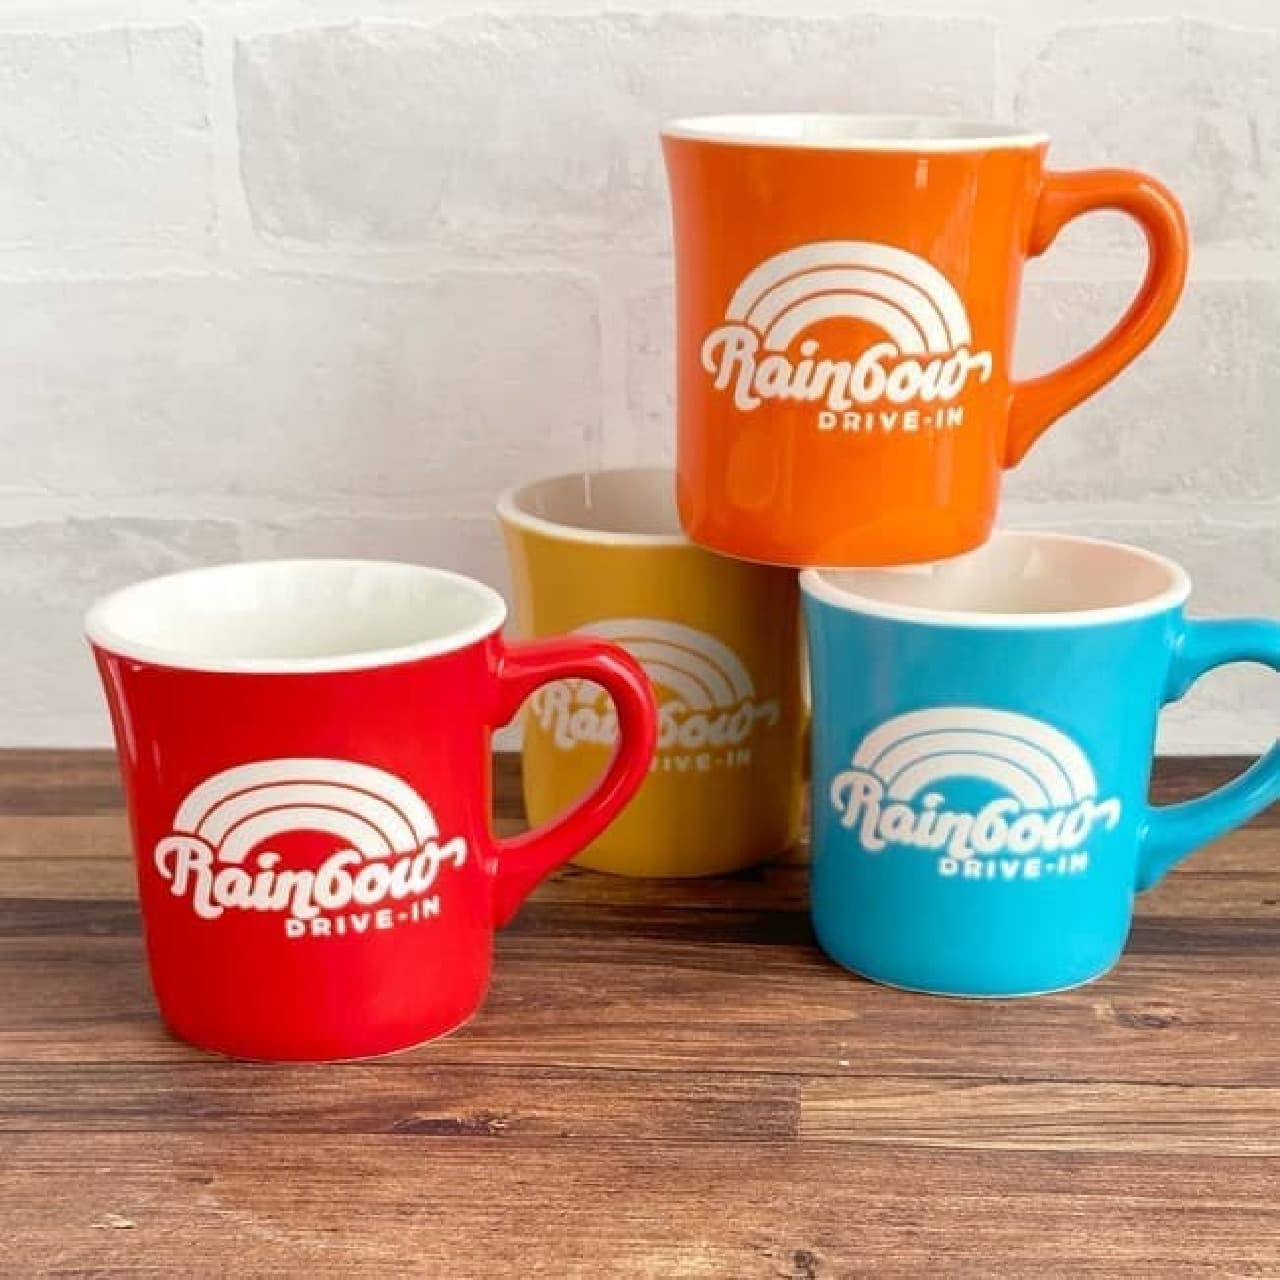 Hawaii's popular store "Rainbow Drive-In" items are now in PLAZA --colorful mugs, tote bags, etc.